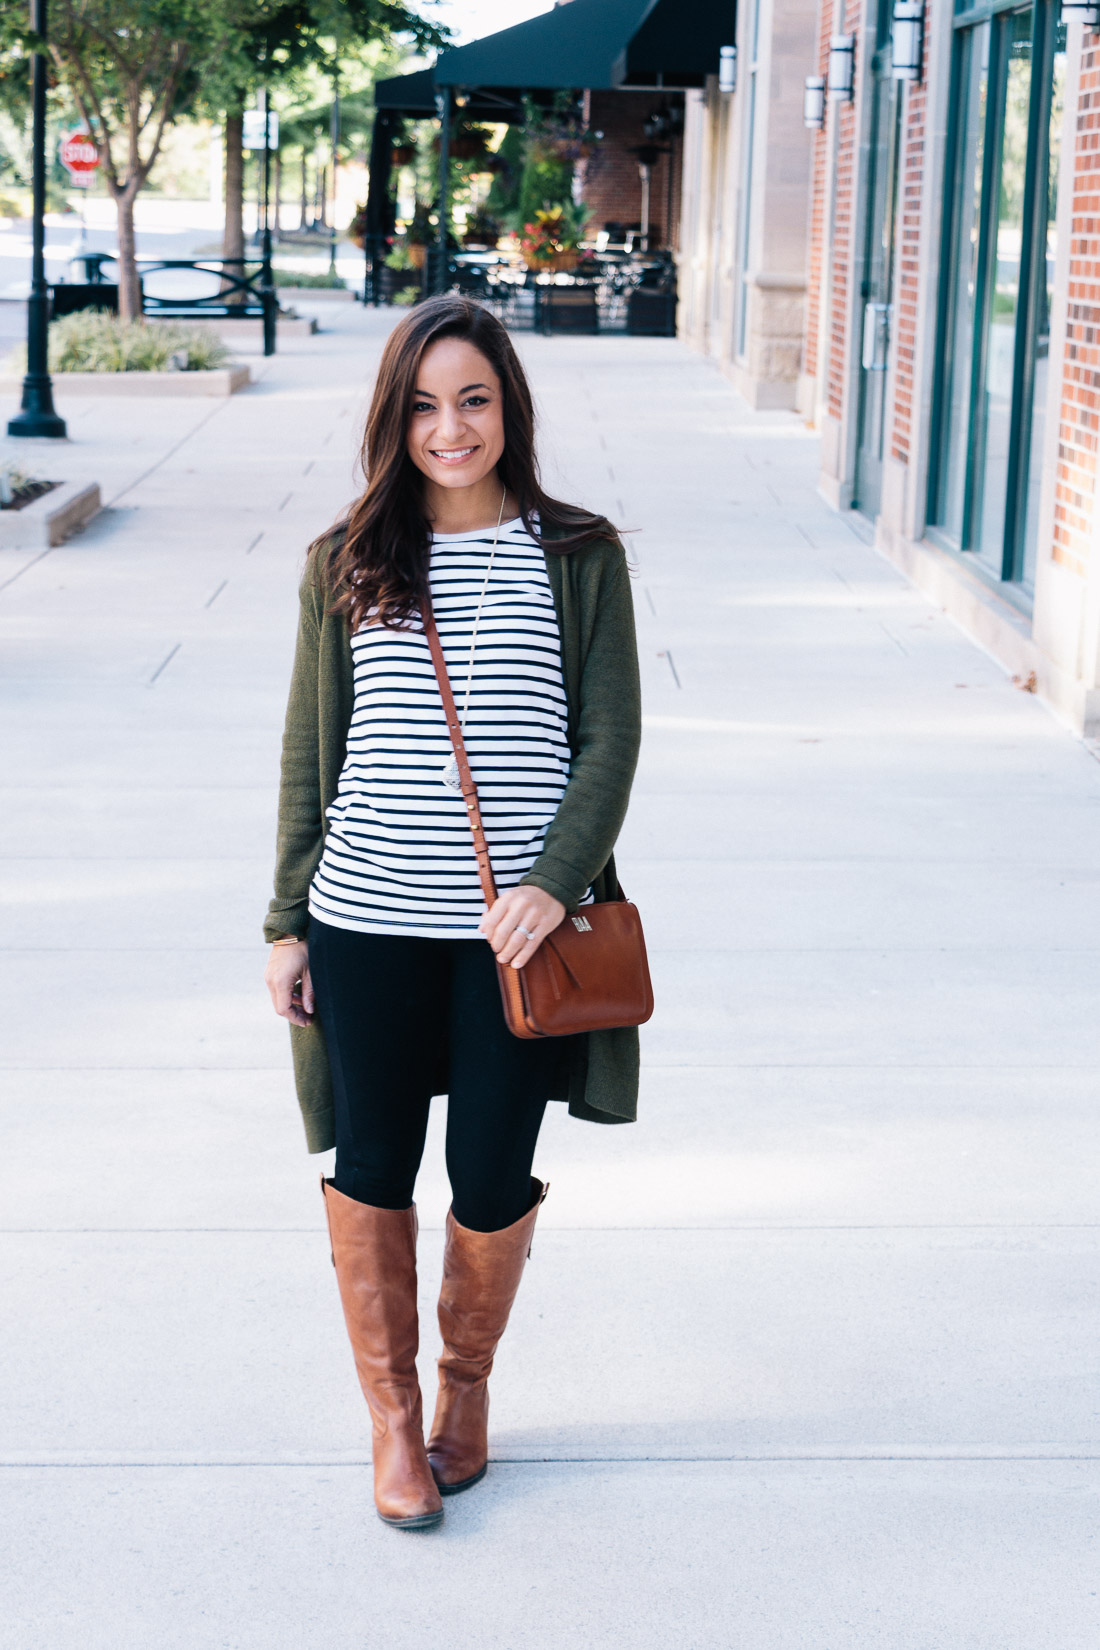 Classic Fall outfit with leggings and long cardigan and riding boots